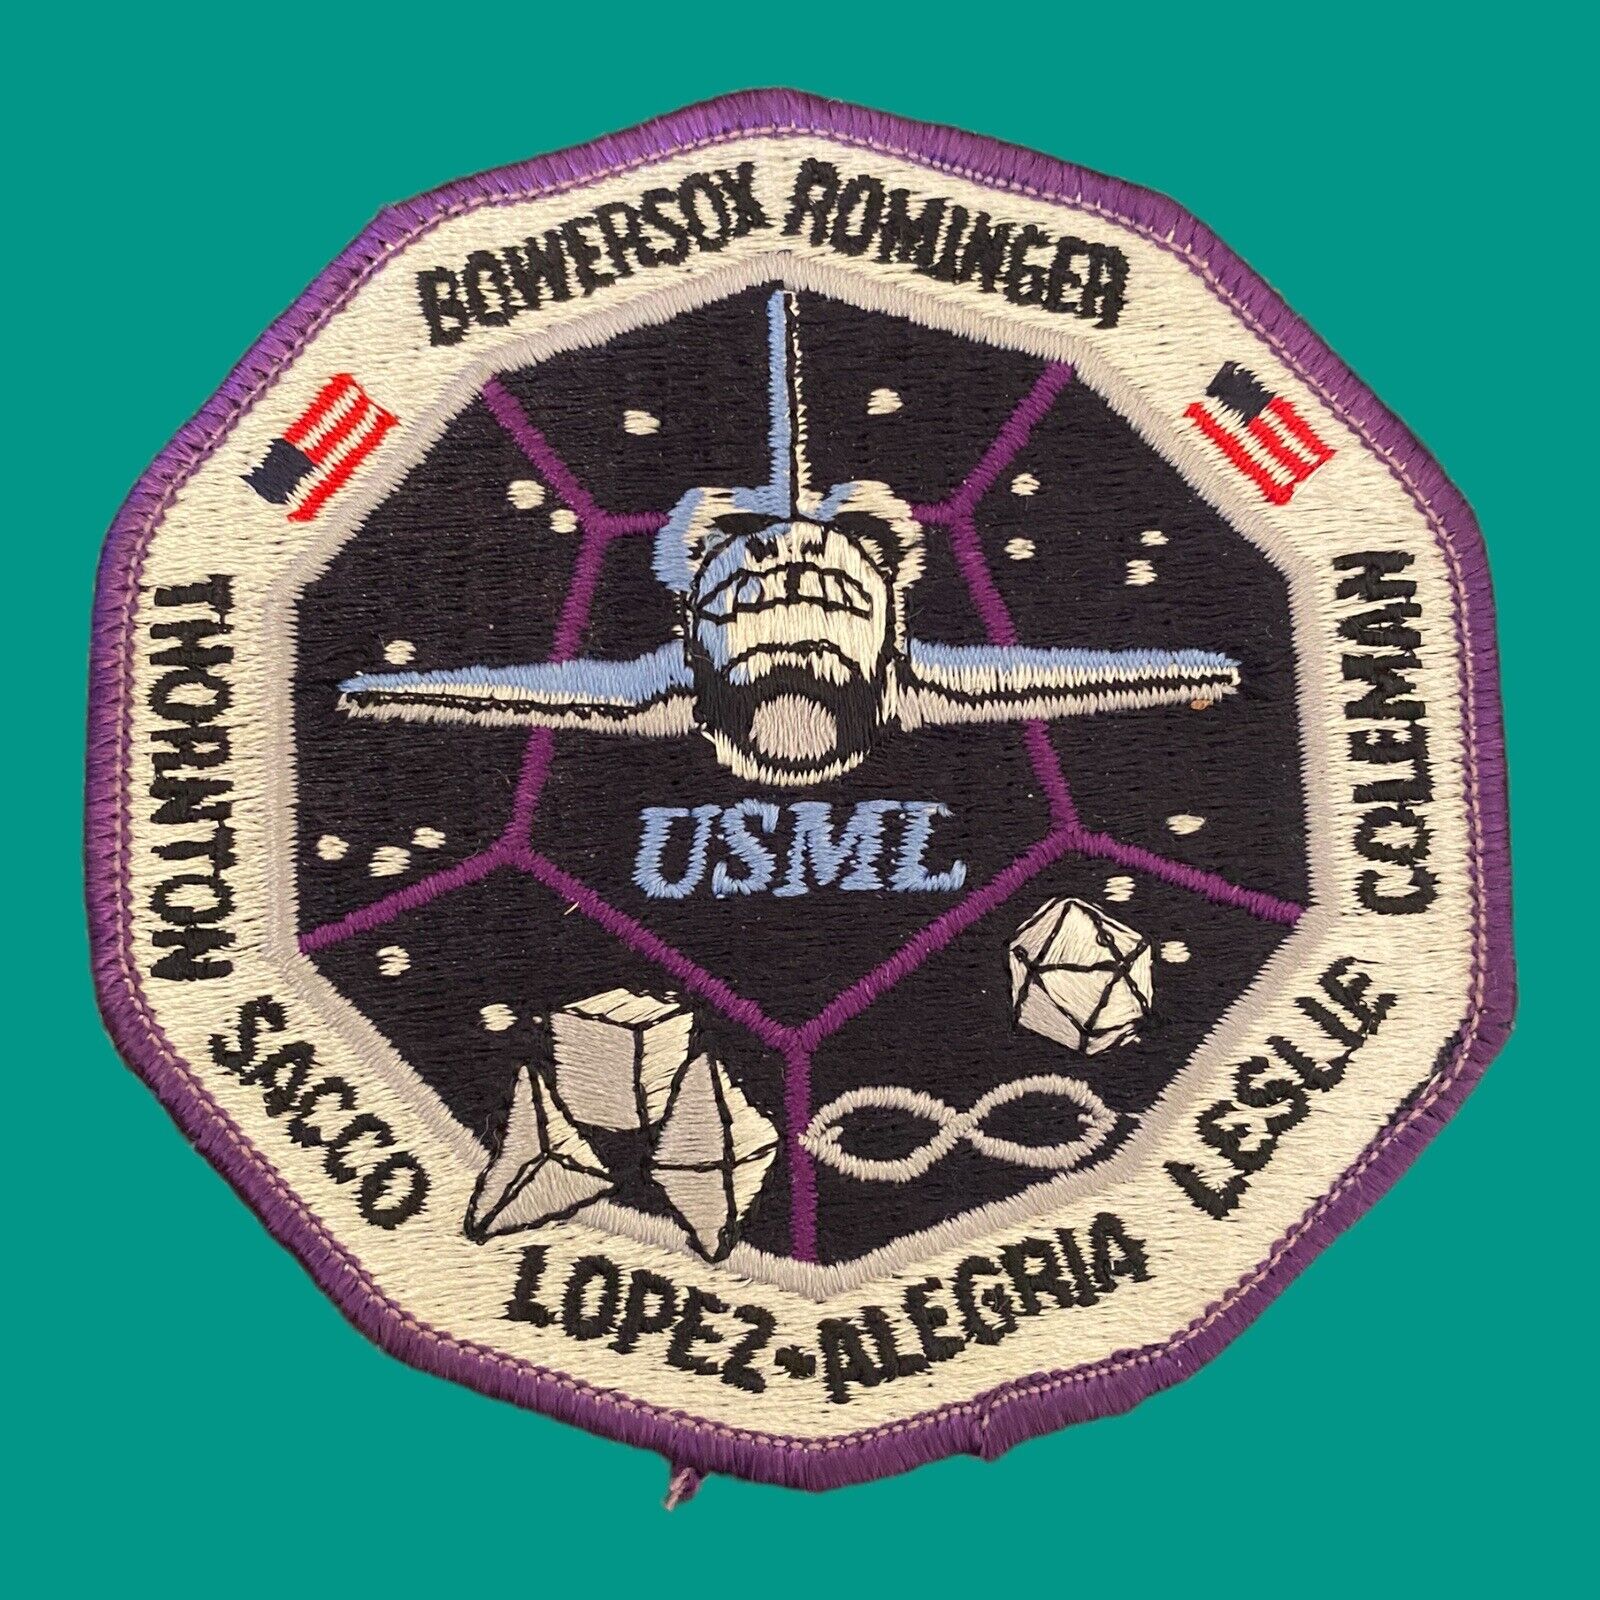 LMH PATCH Badge NASA SPACE SHUTTLE Columbia 1995 STS-73 USML Bowersox Rominger